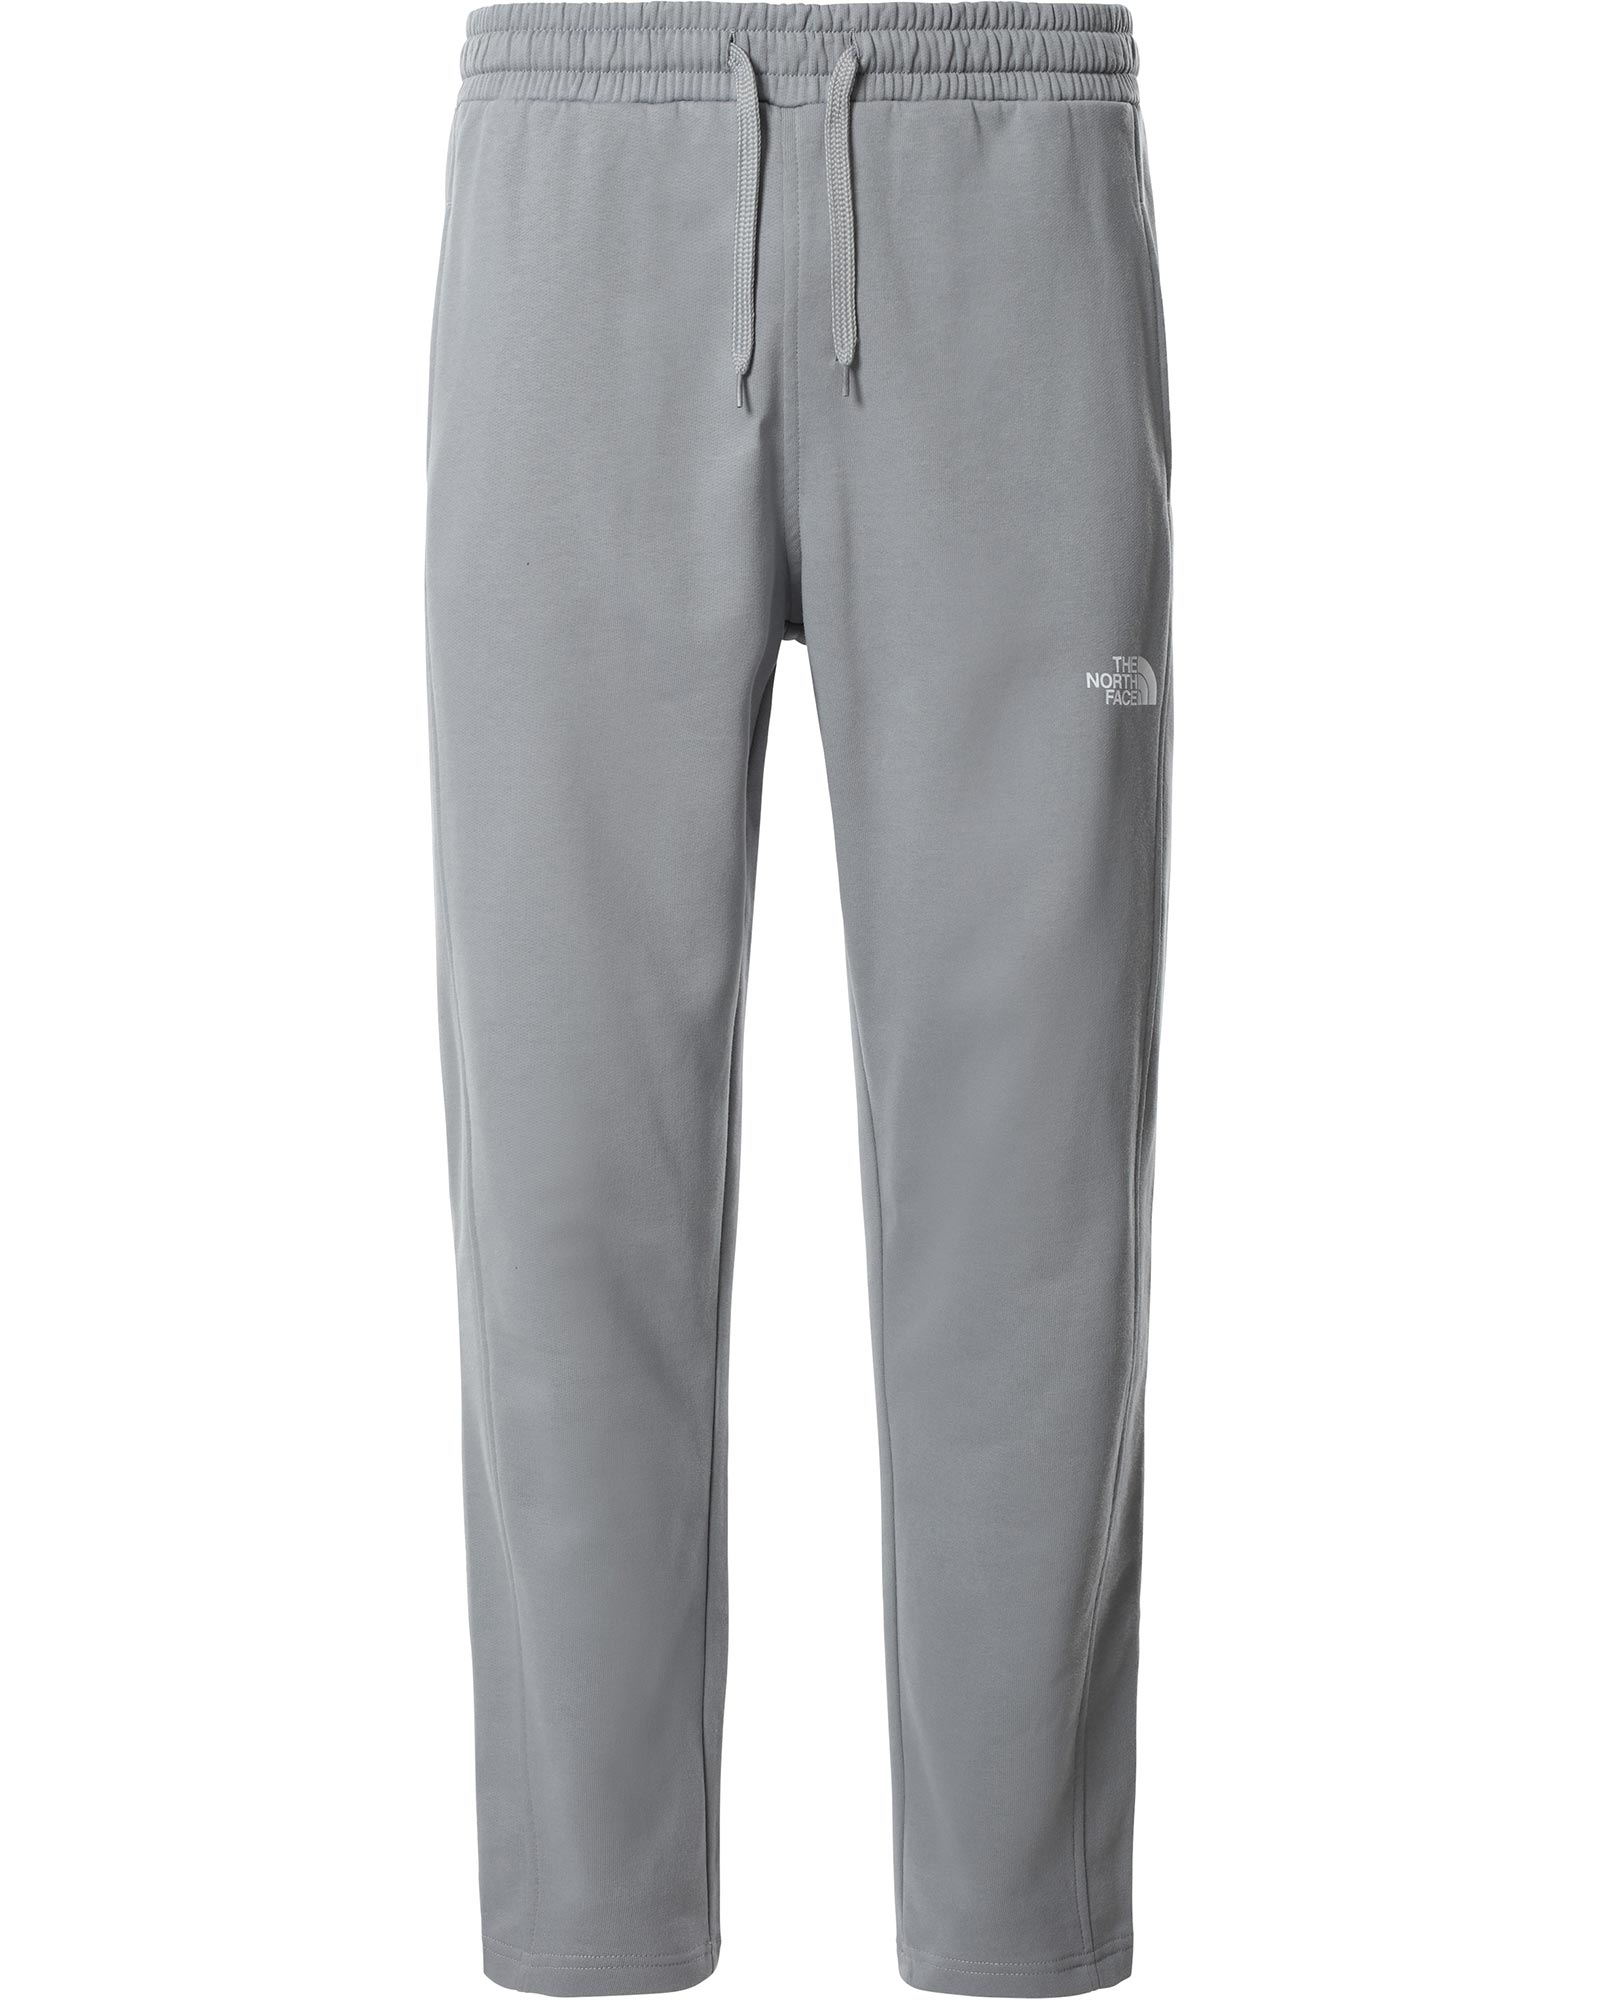 The North Face Standard Men’s Pants - Tradewinds Grey XS